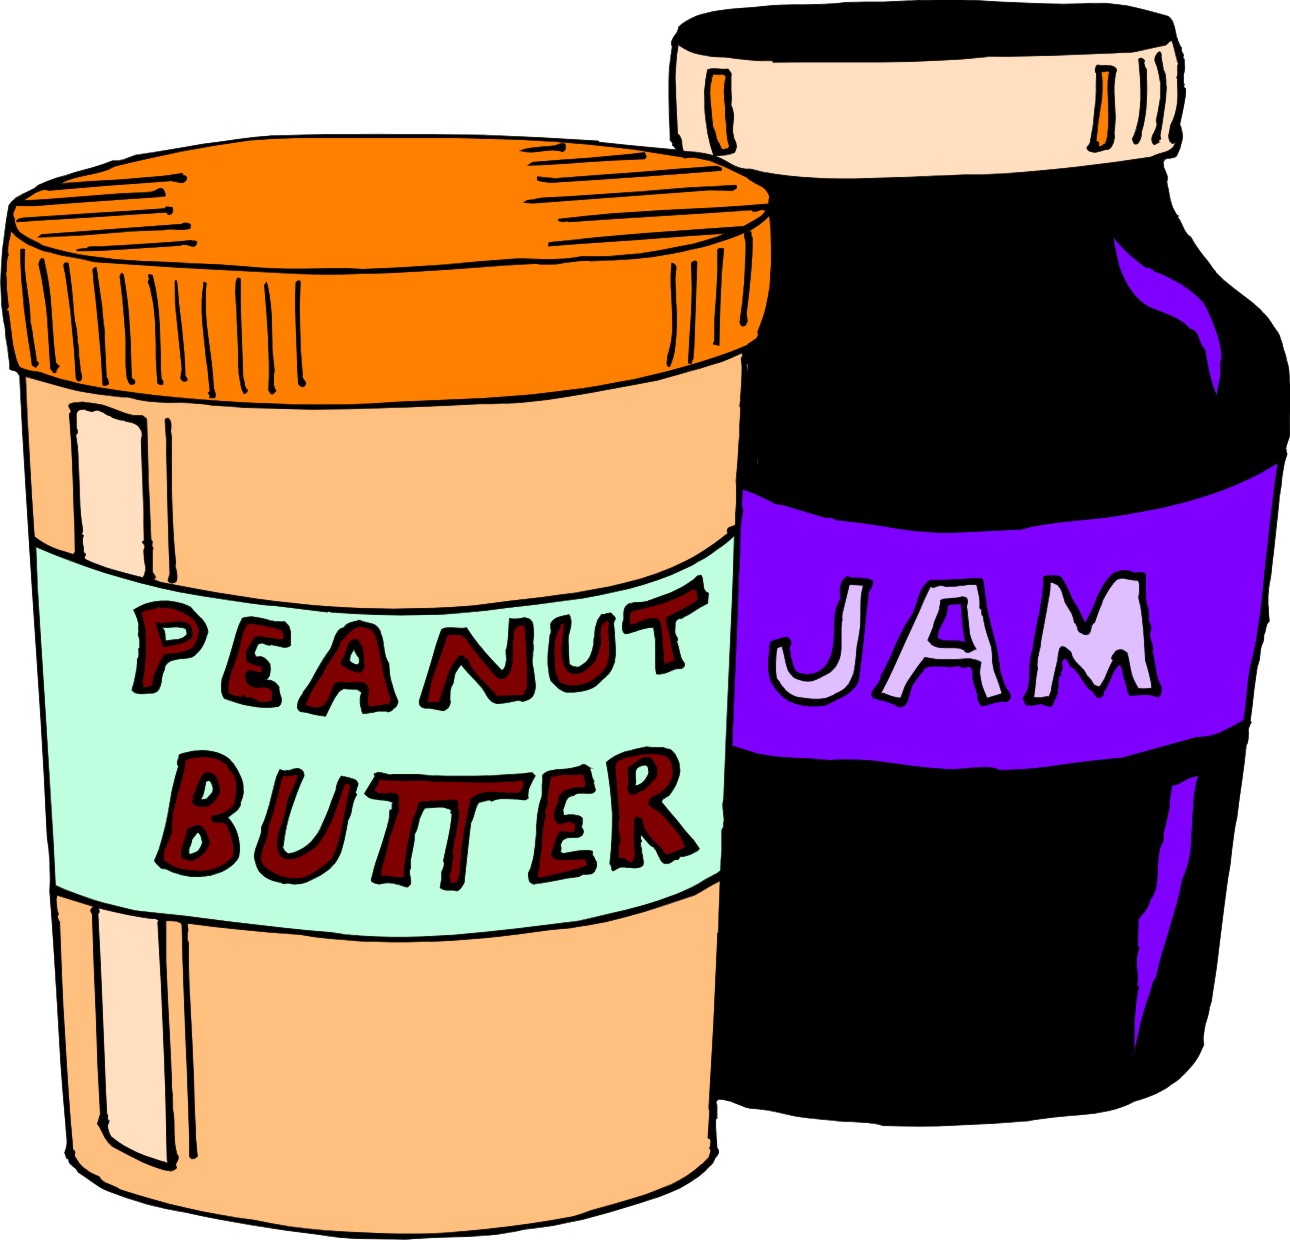 Peanut Butter And Jelly Clip Art - Clipart library